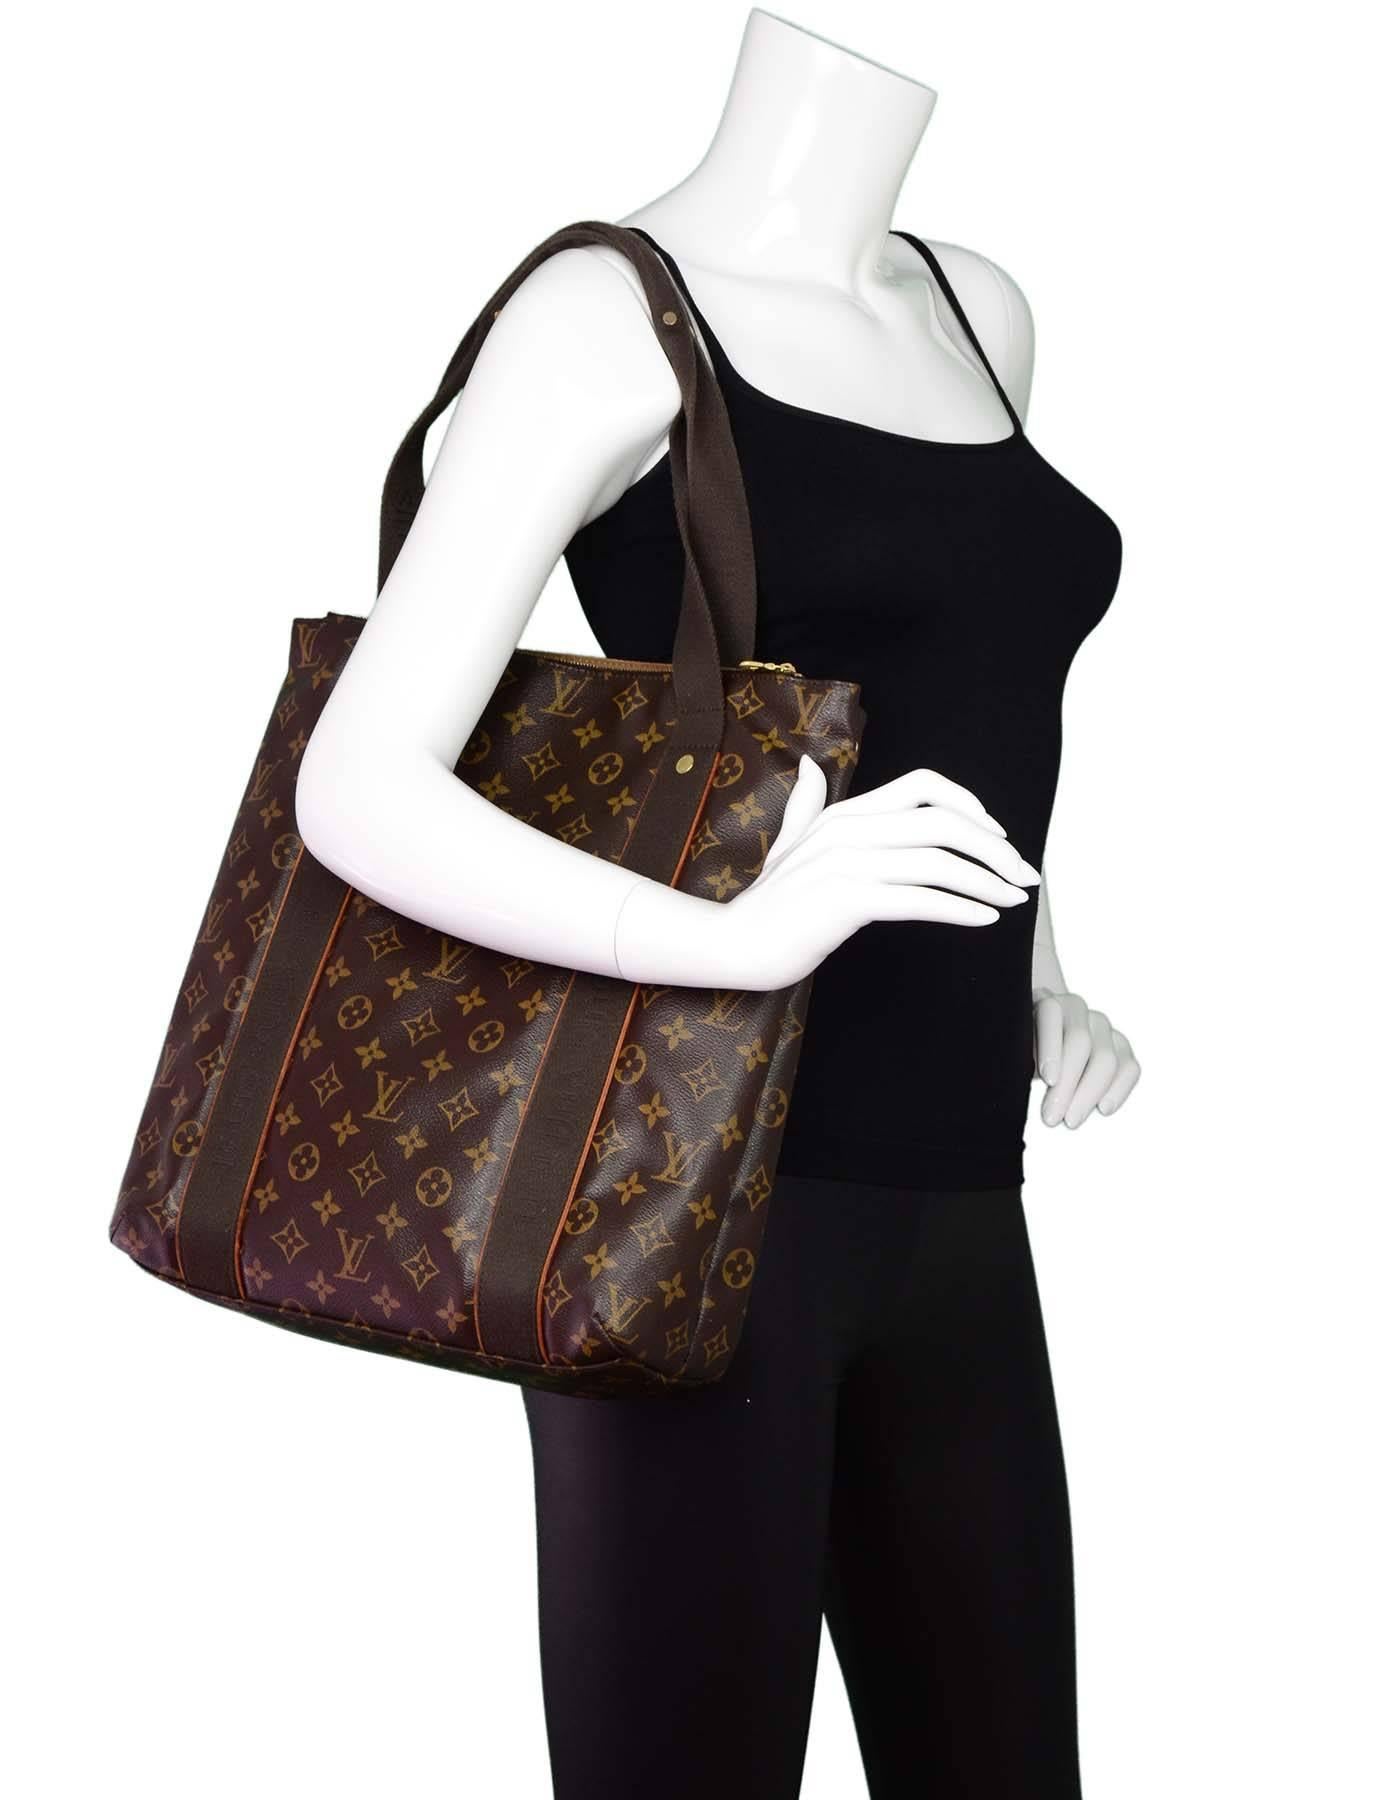 Louis Vuitton Monogram Beaubourg Tote
Features logo at straps

Made In: France
Year of Production: 2008
Color: Brown and tan
Hardware: Goldtone
Materials: Coated canvas, vachetta leather
Lining: Brown canvas
Closure/Opening: Open top
Exterior